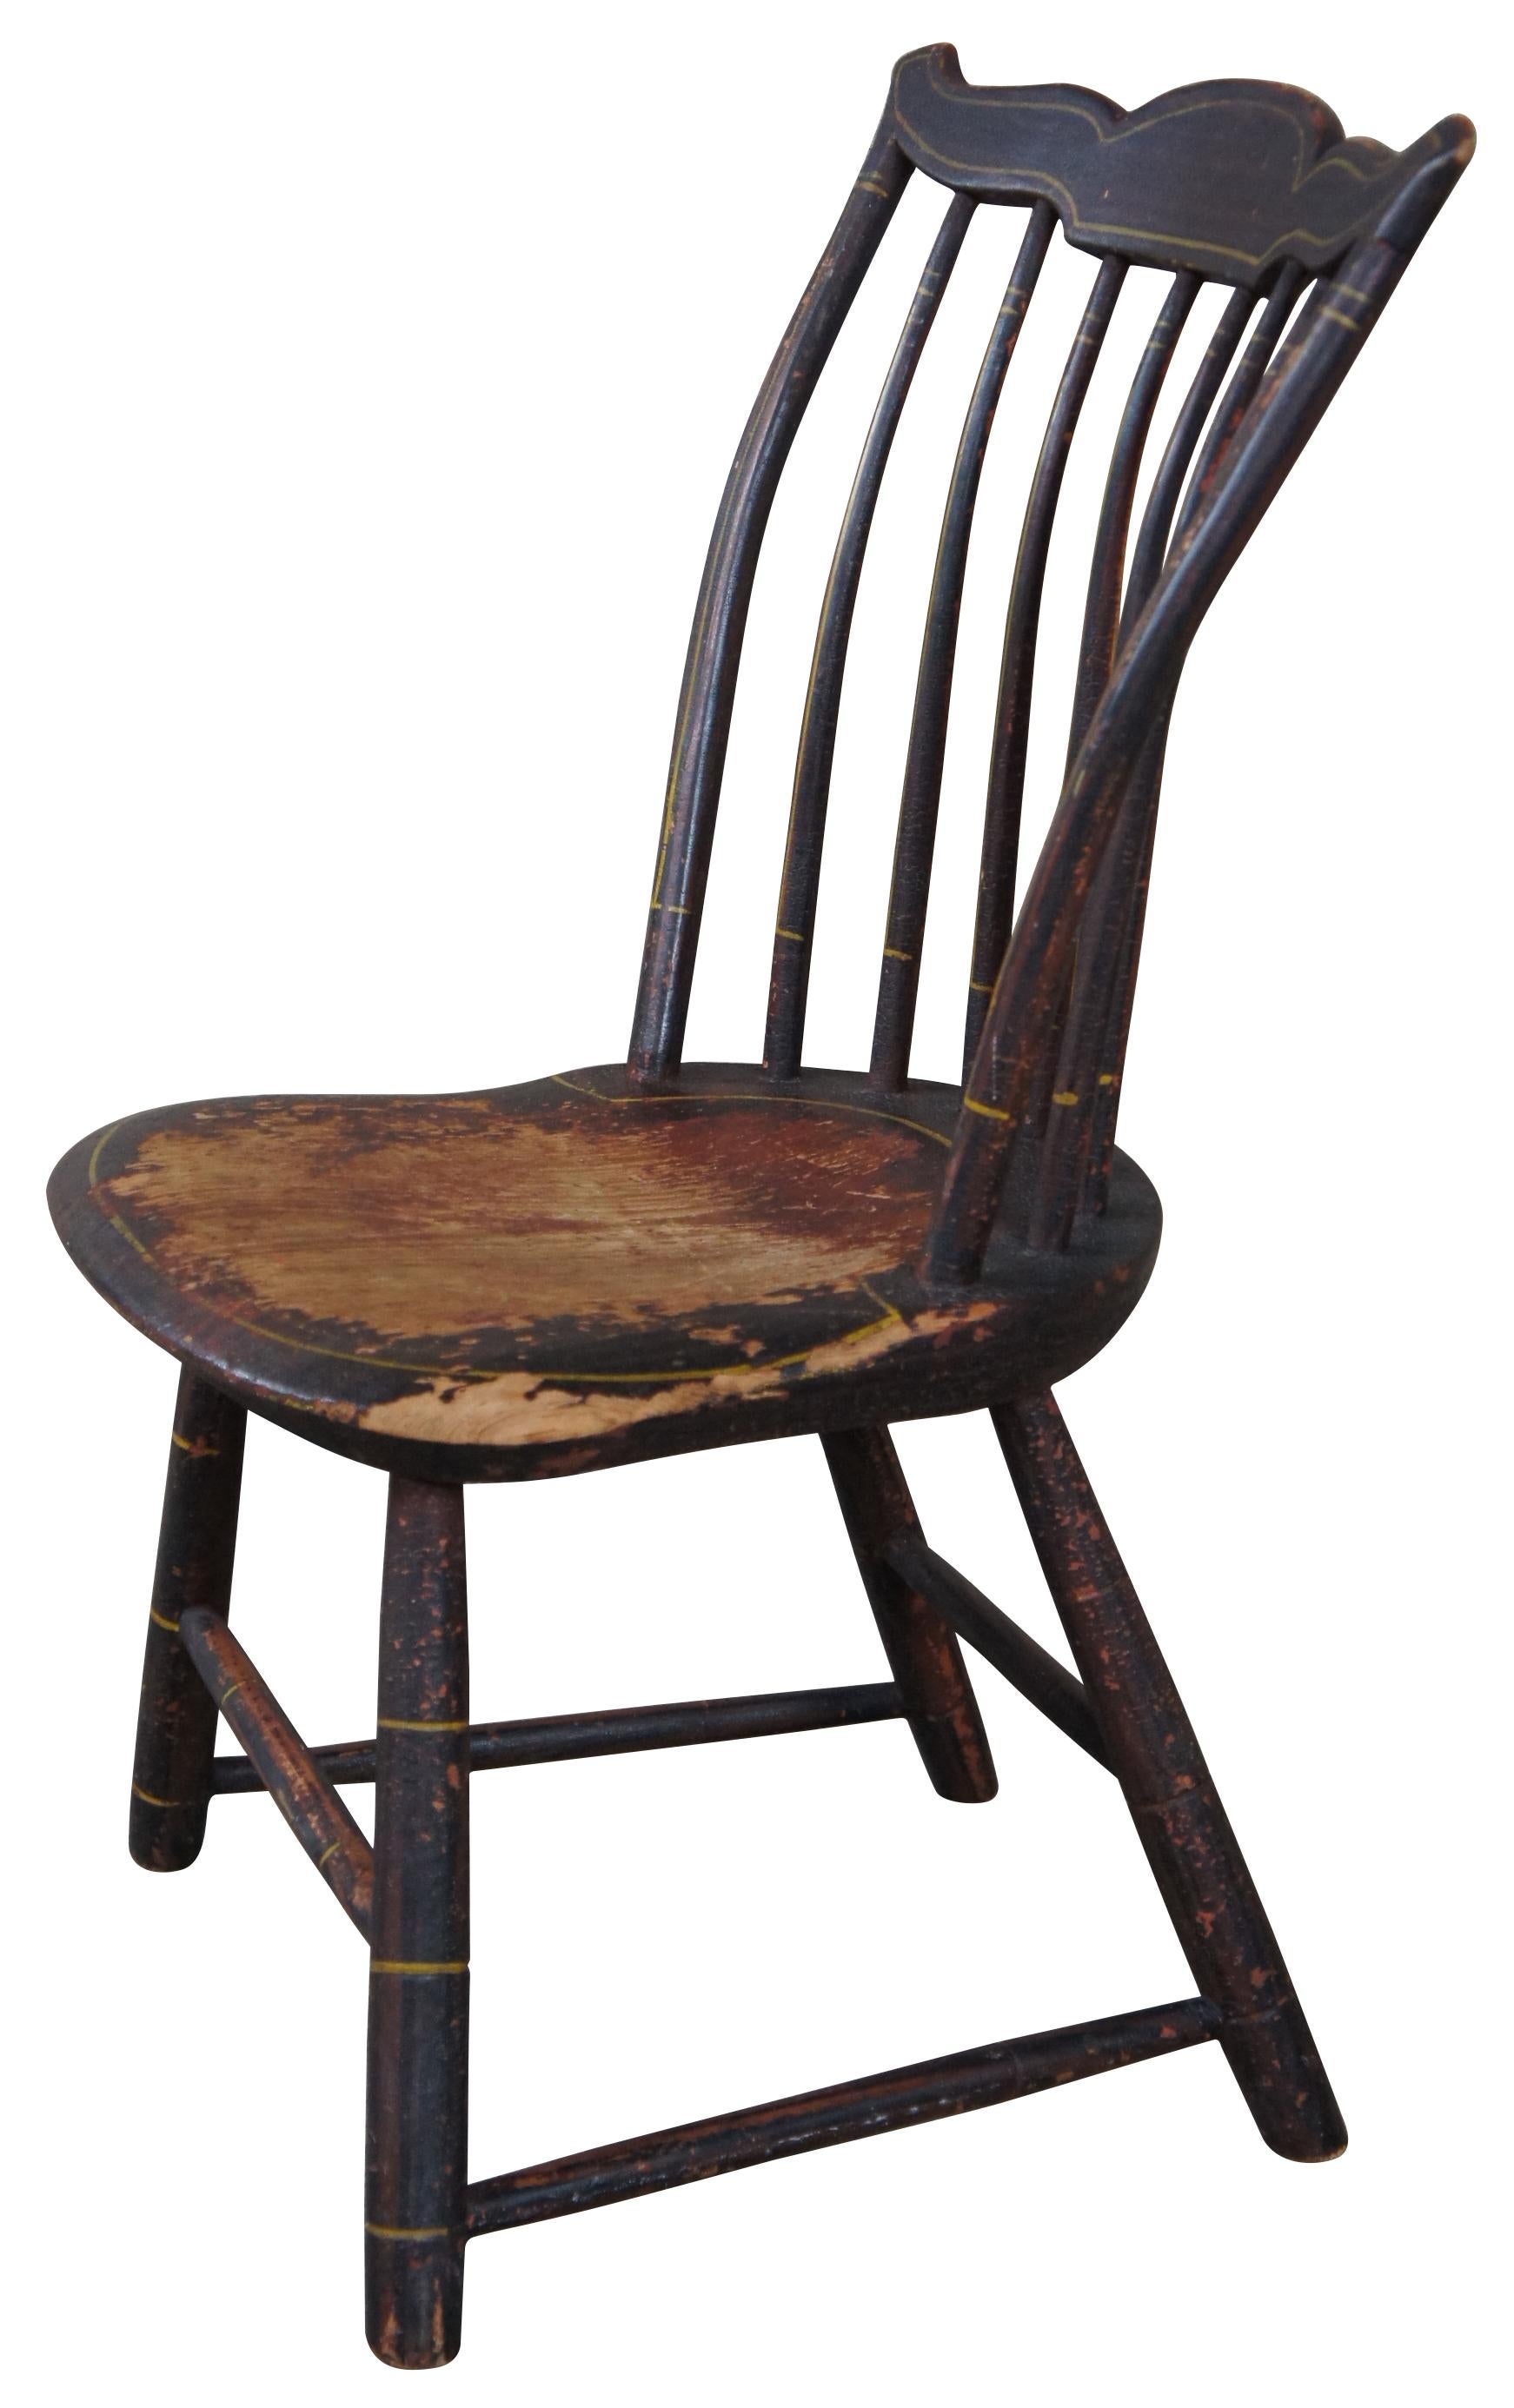 Antique New England Windsor step down chair in its original finish with gold painted trim. Crica first half 19th century.
 